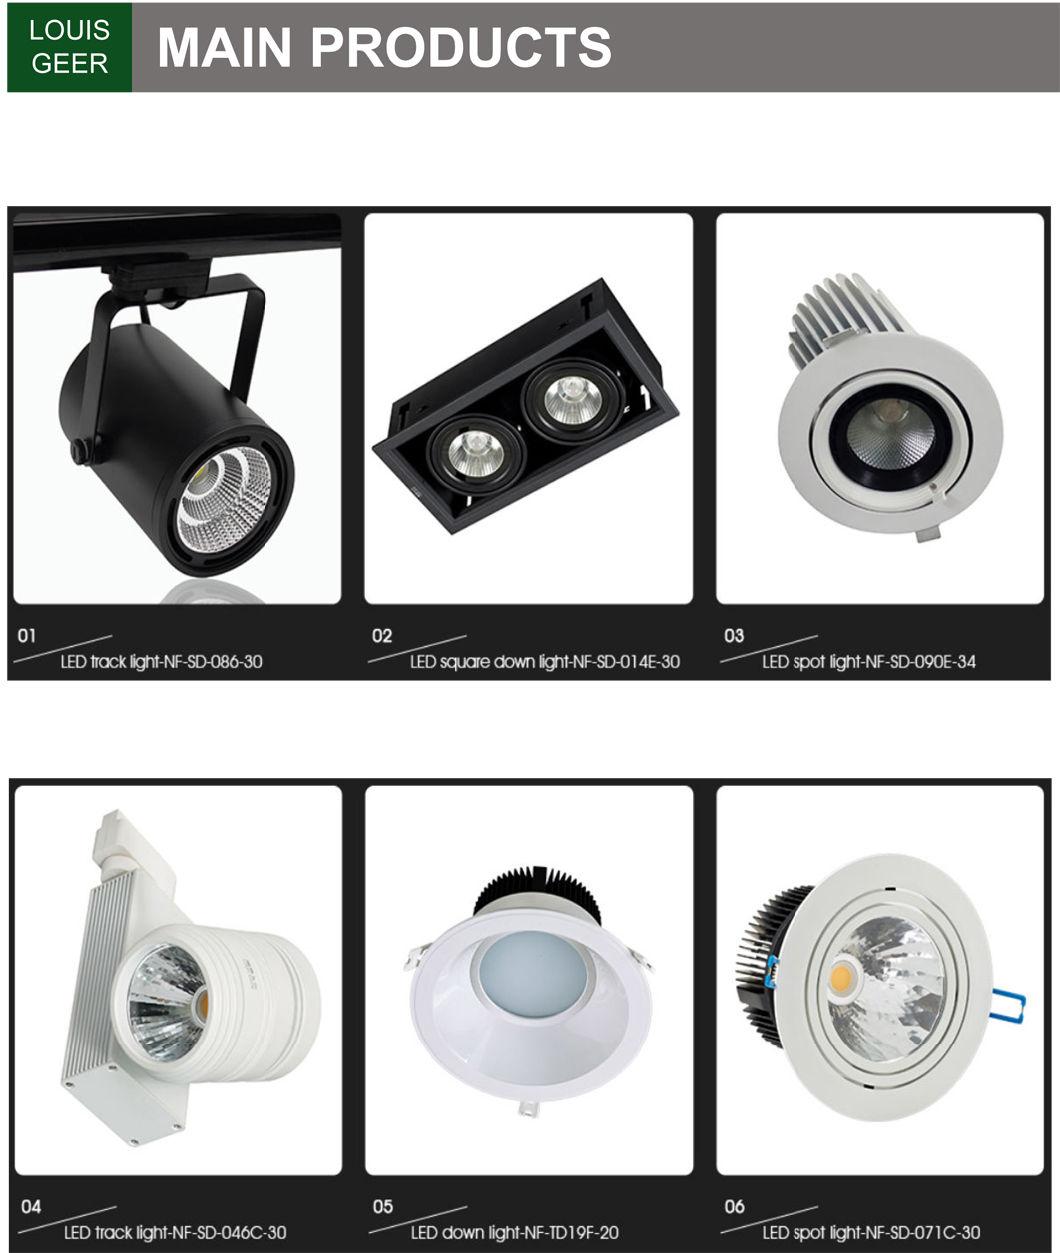 Factory Wholesale Exquisite High Efficiency GU10 LED Dimmable Bulb Spotlight